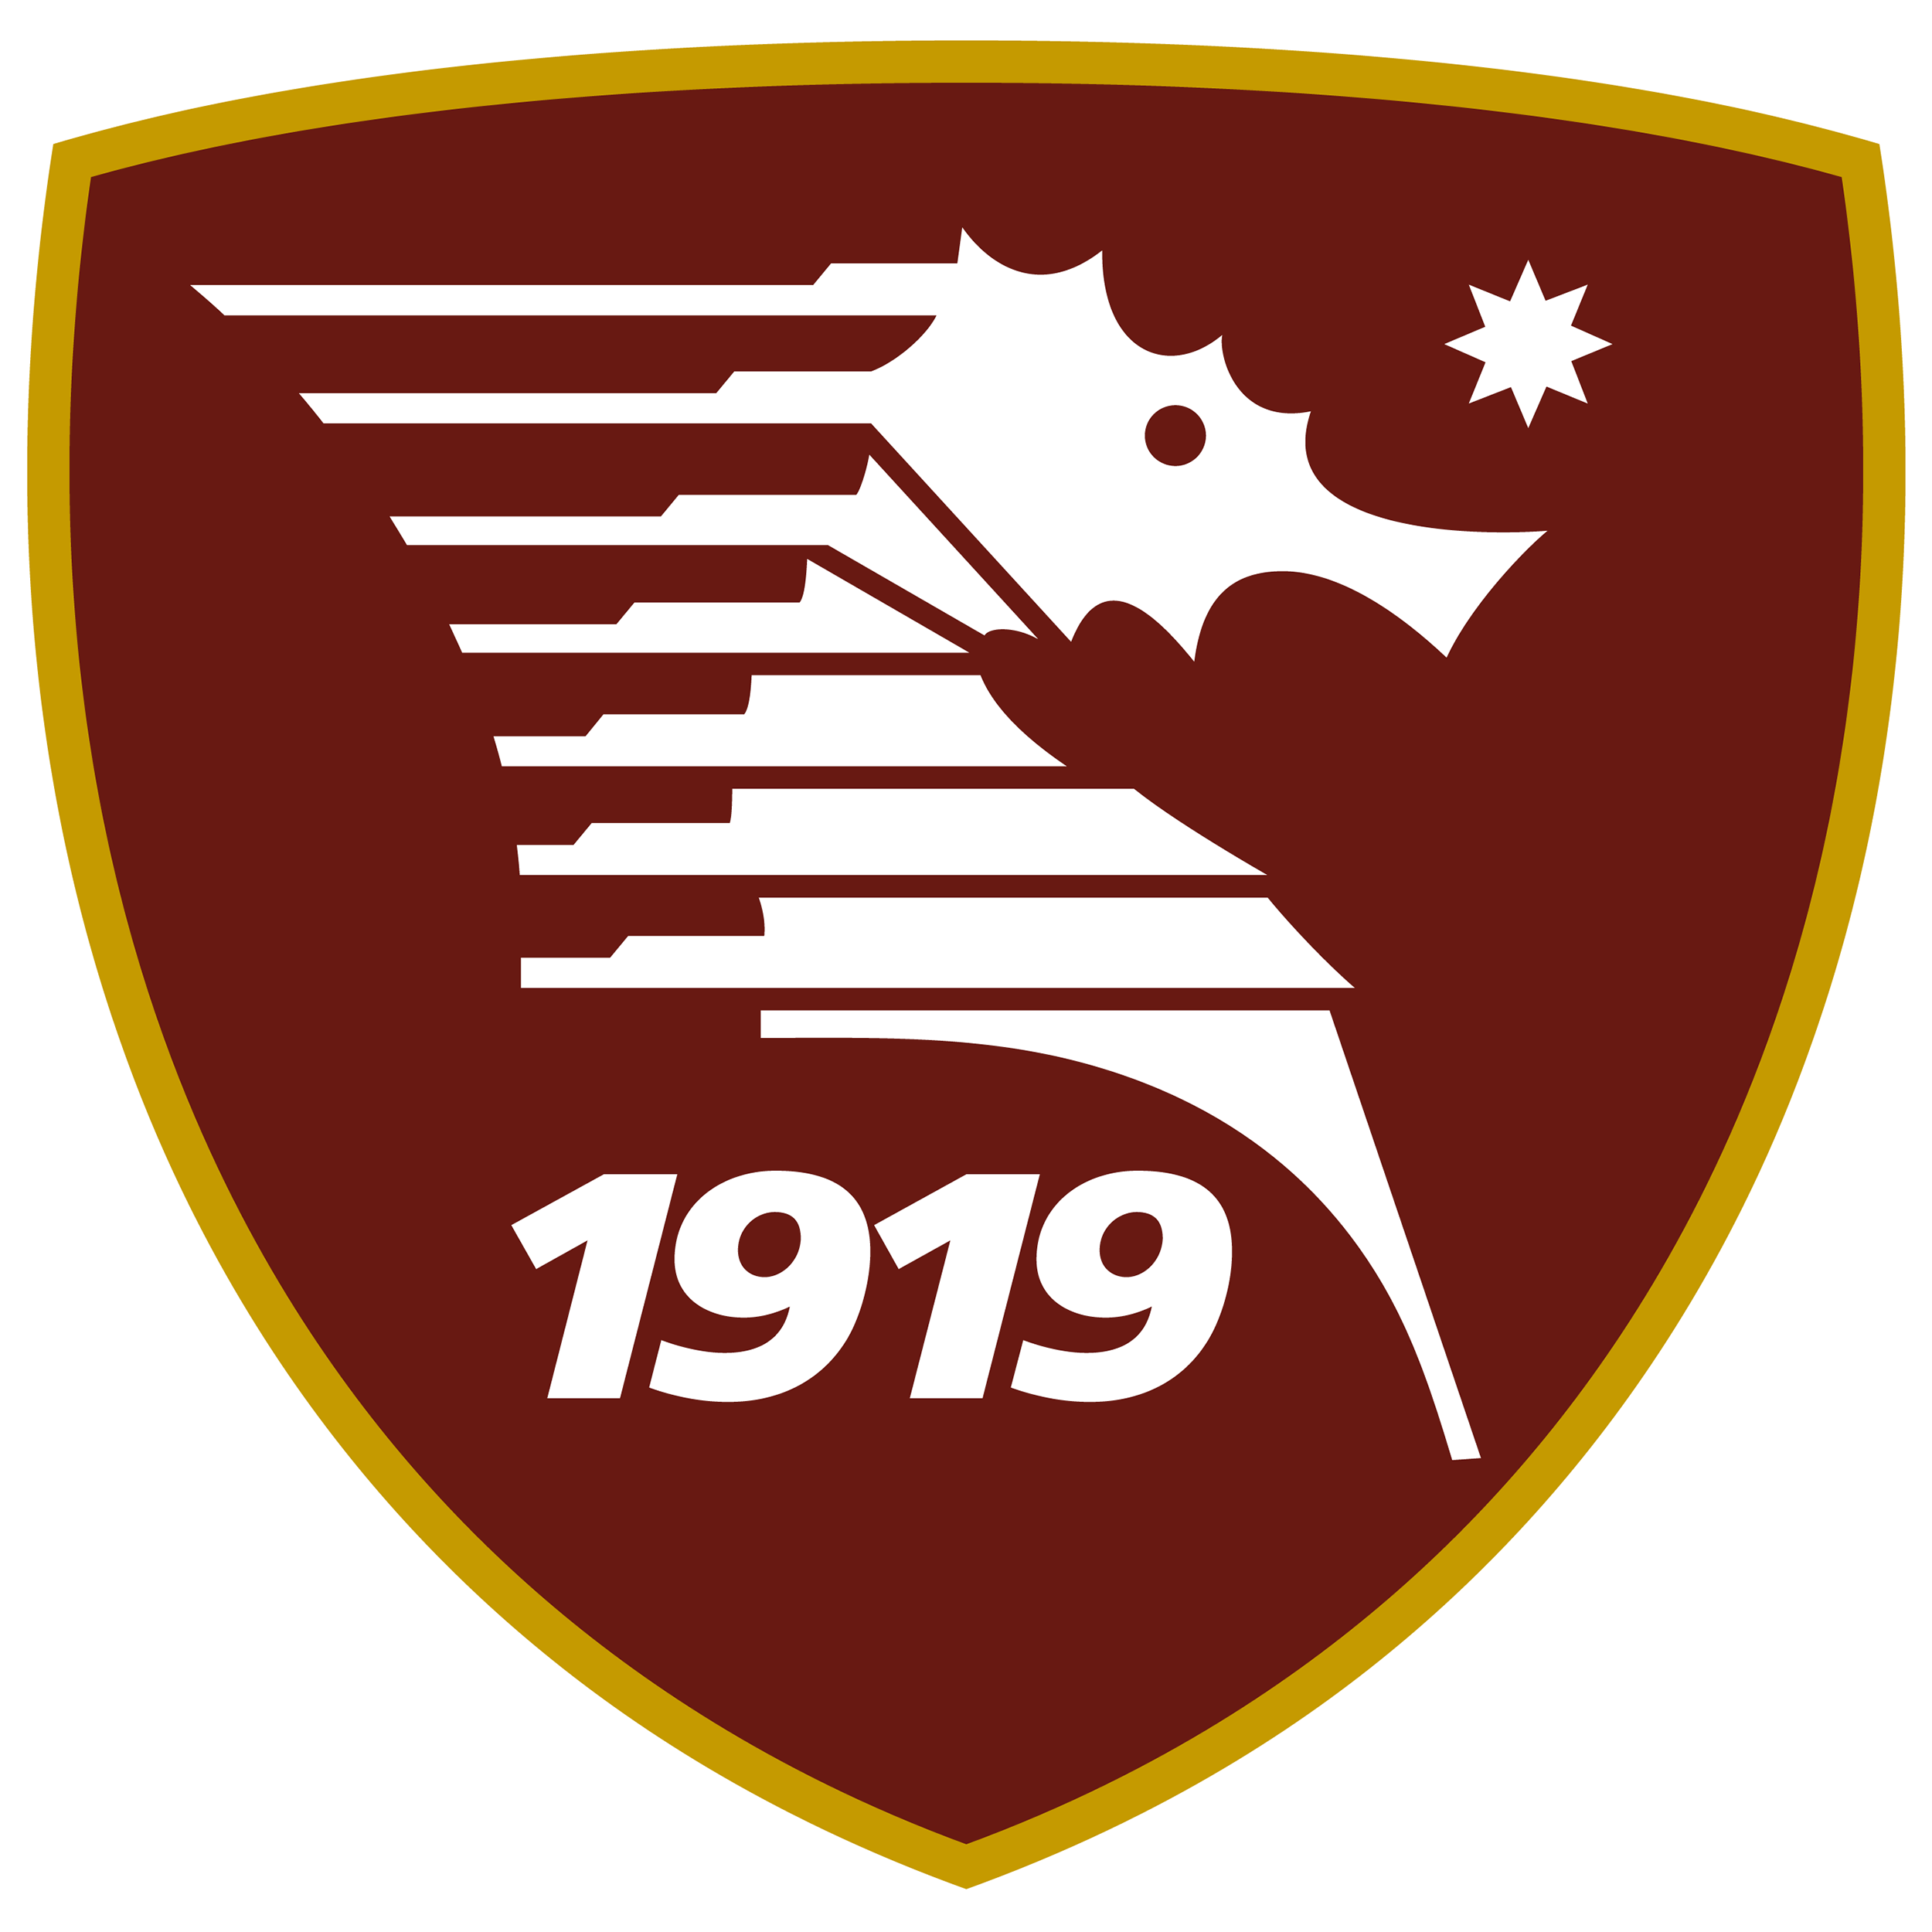 Salernitana vs Verona: It’s time for the Salerno side to pick up their first points of the season